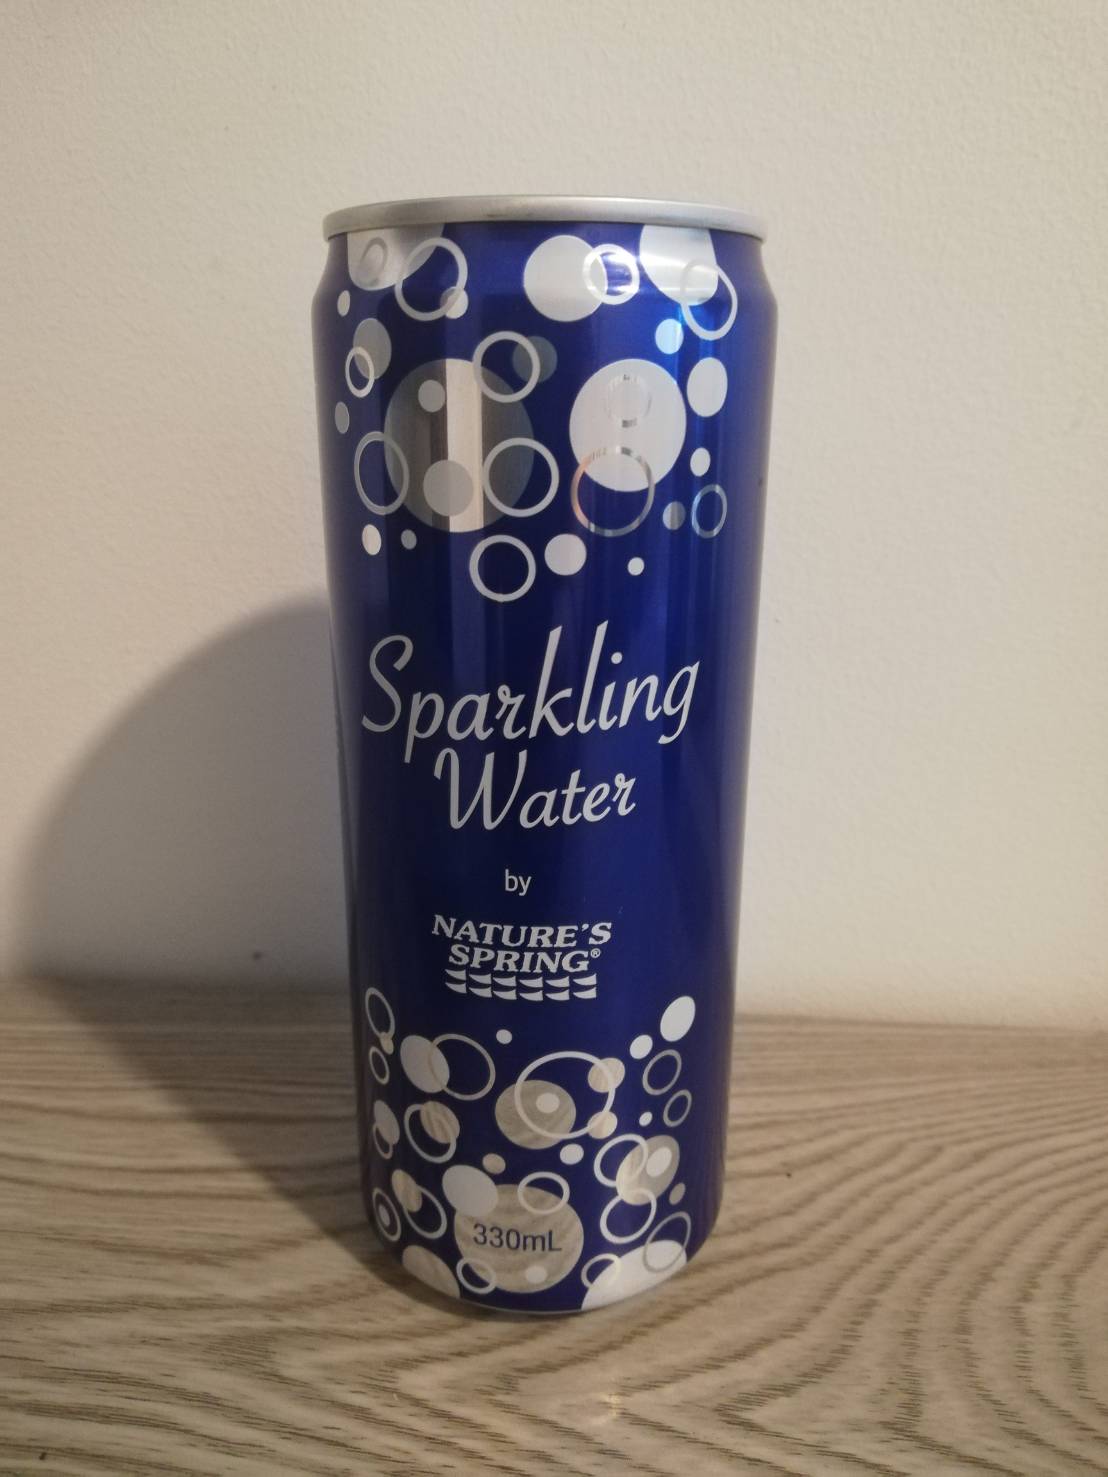 Nature's Spring Sparkling Water　フィリピン　炭酸水